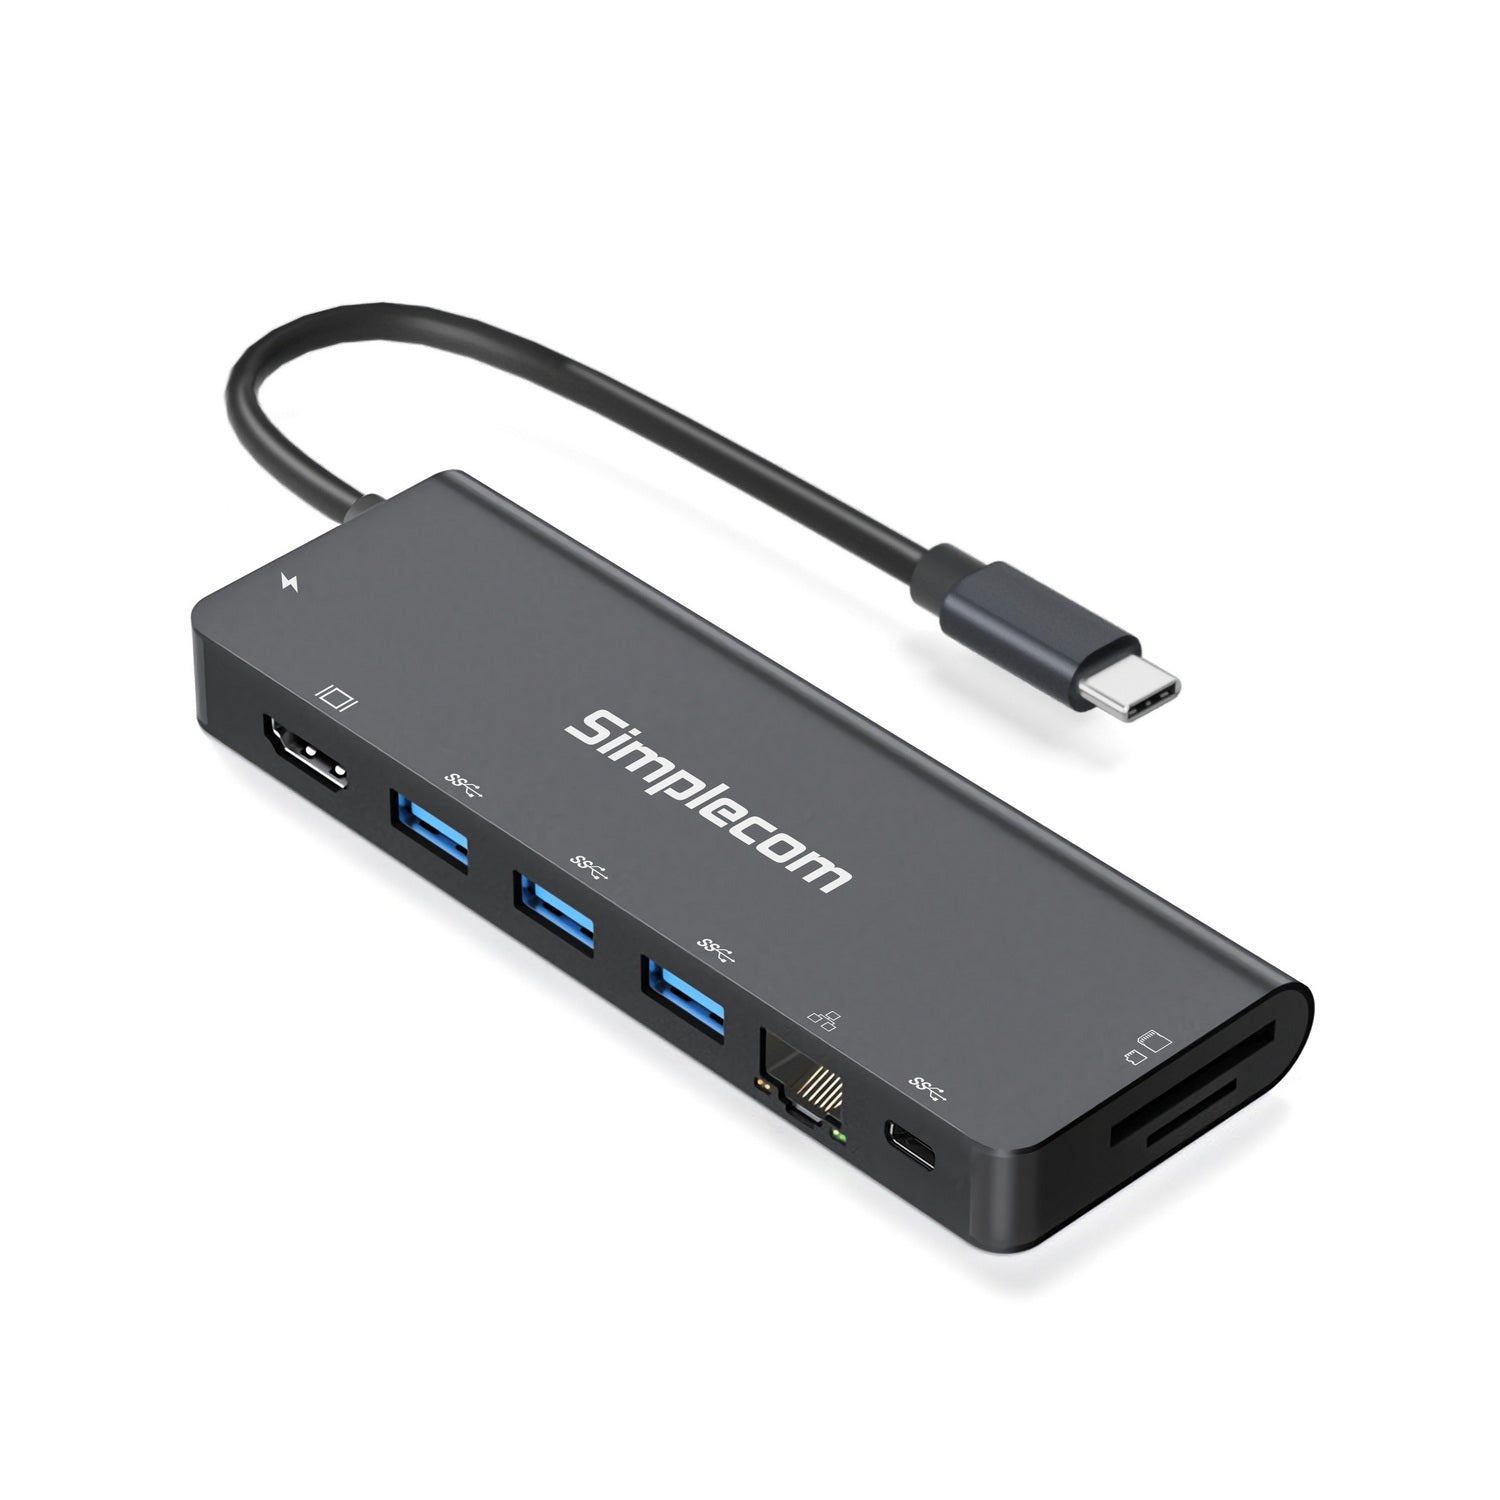 simplecom-chn590-usb-c-superspeed-9-in-1-multiport-docking-station